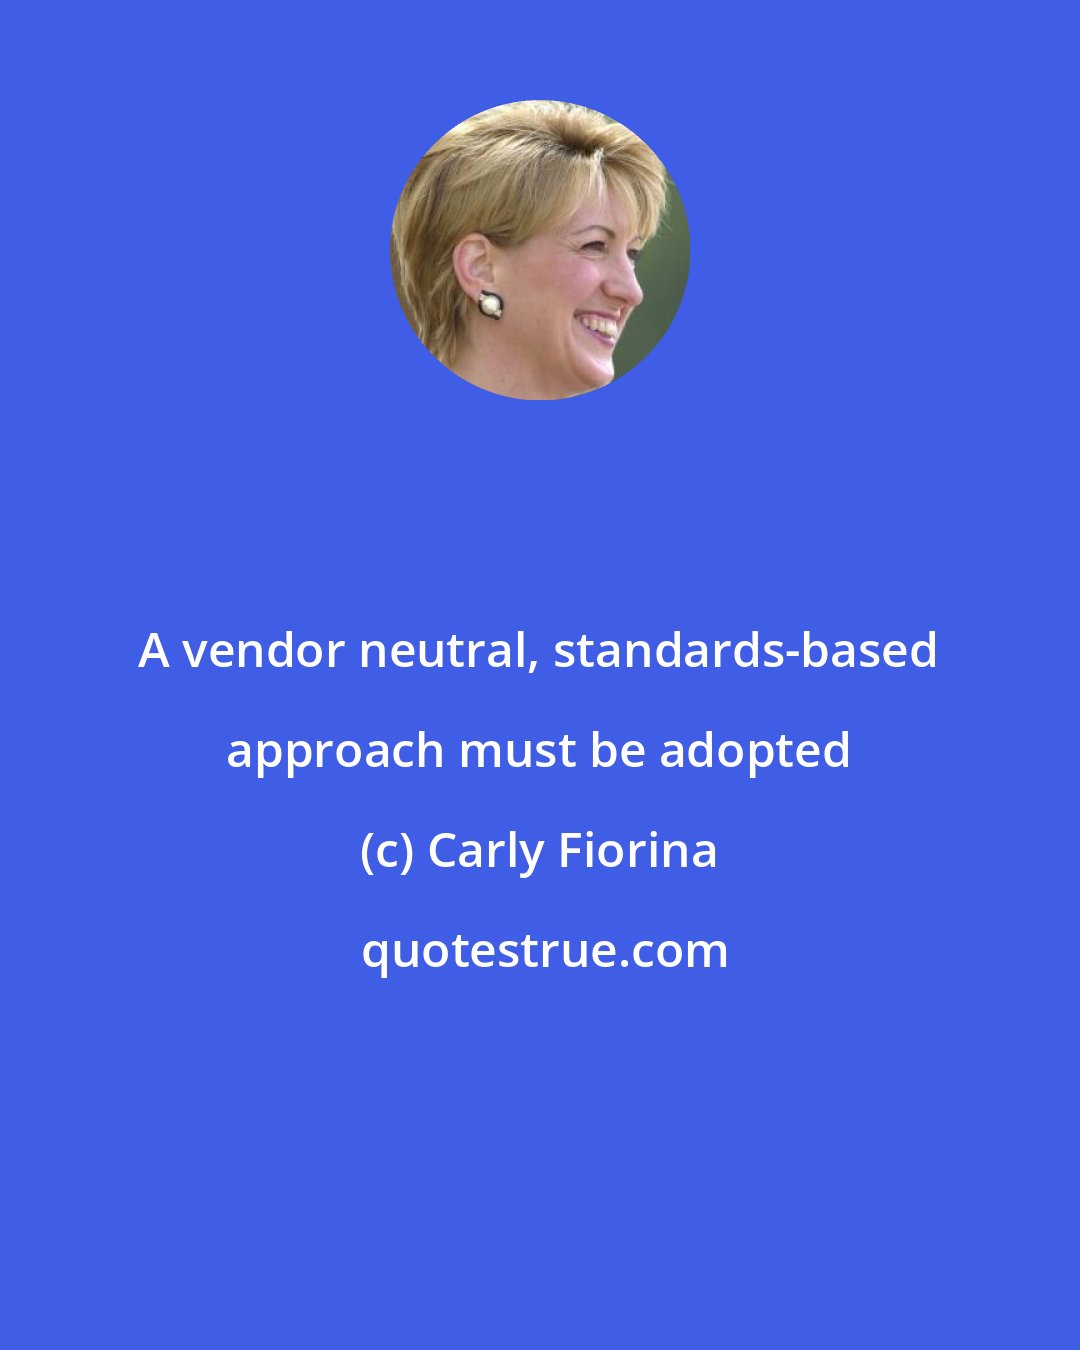 Carly Fiorina: A vendor neutral, standards-based approach must be adopted